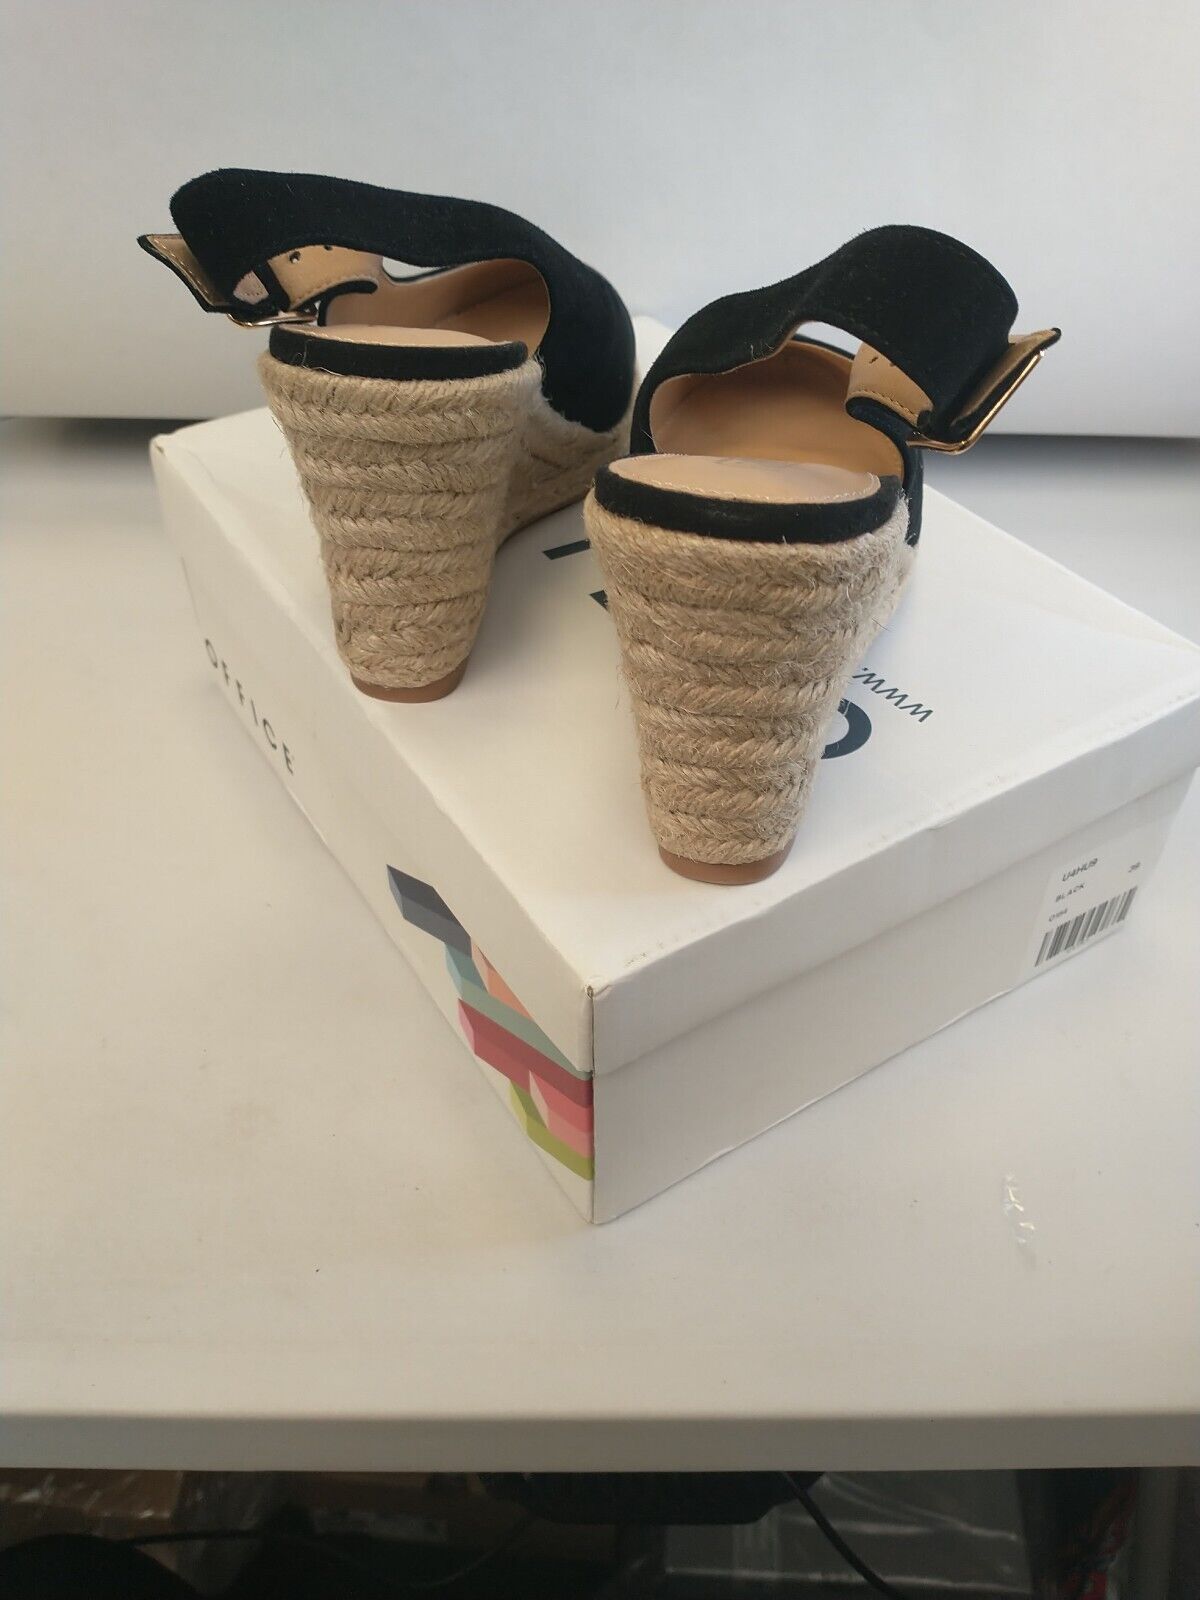 Office Wedged Shoes. Size UK 4 **** Ref VS1